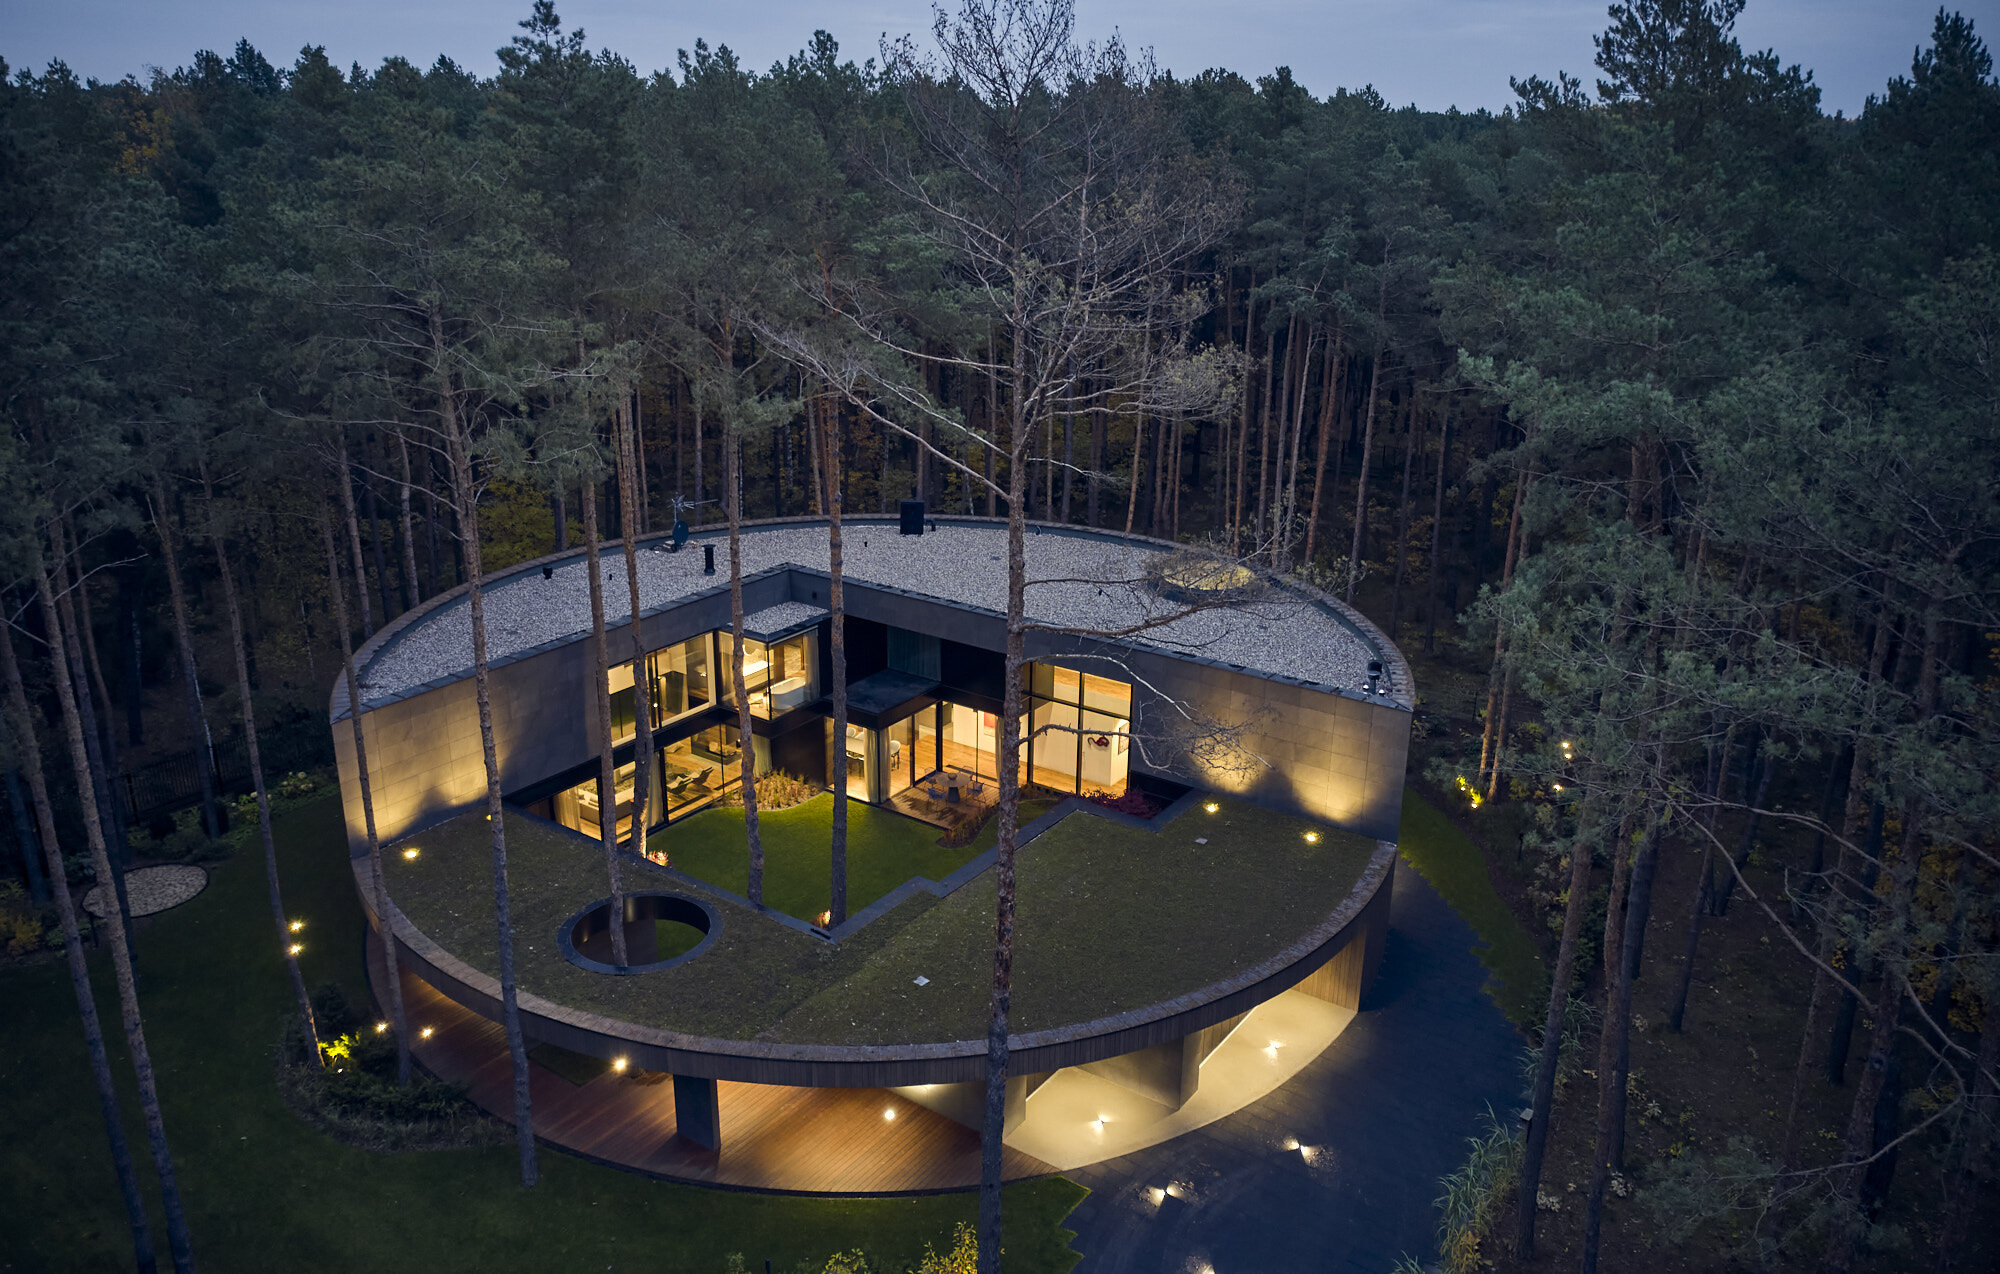 A house resembling a tree trunk.  See an unusual, round building in the heart of the forest